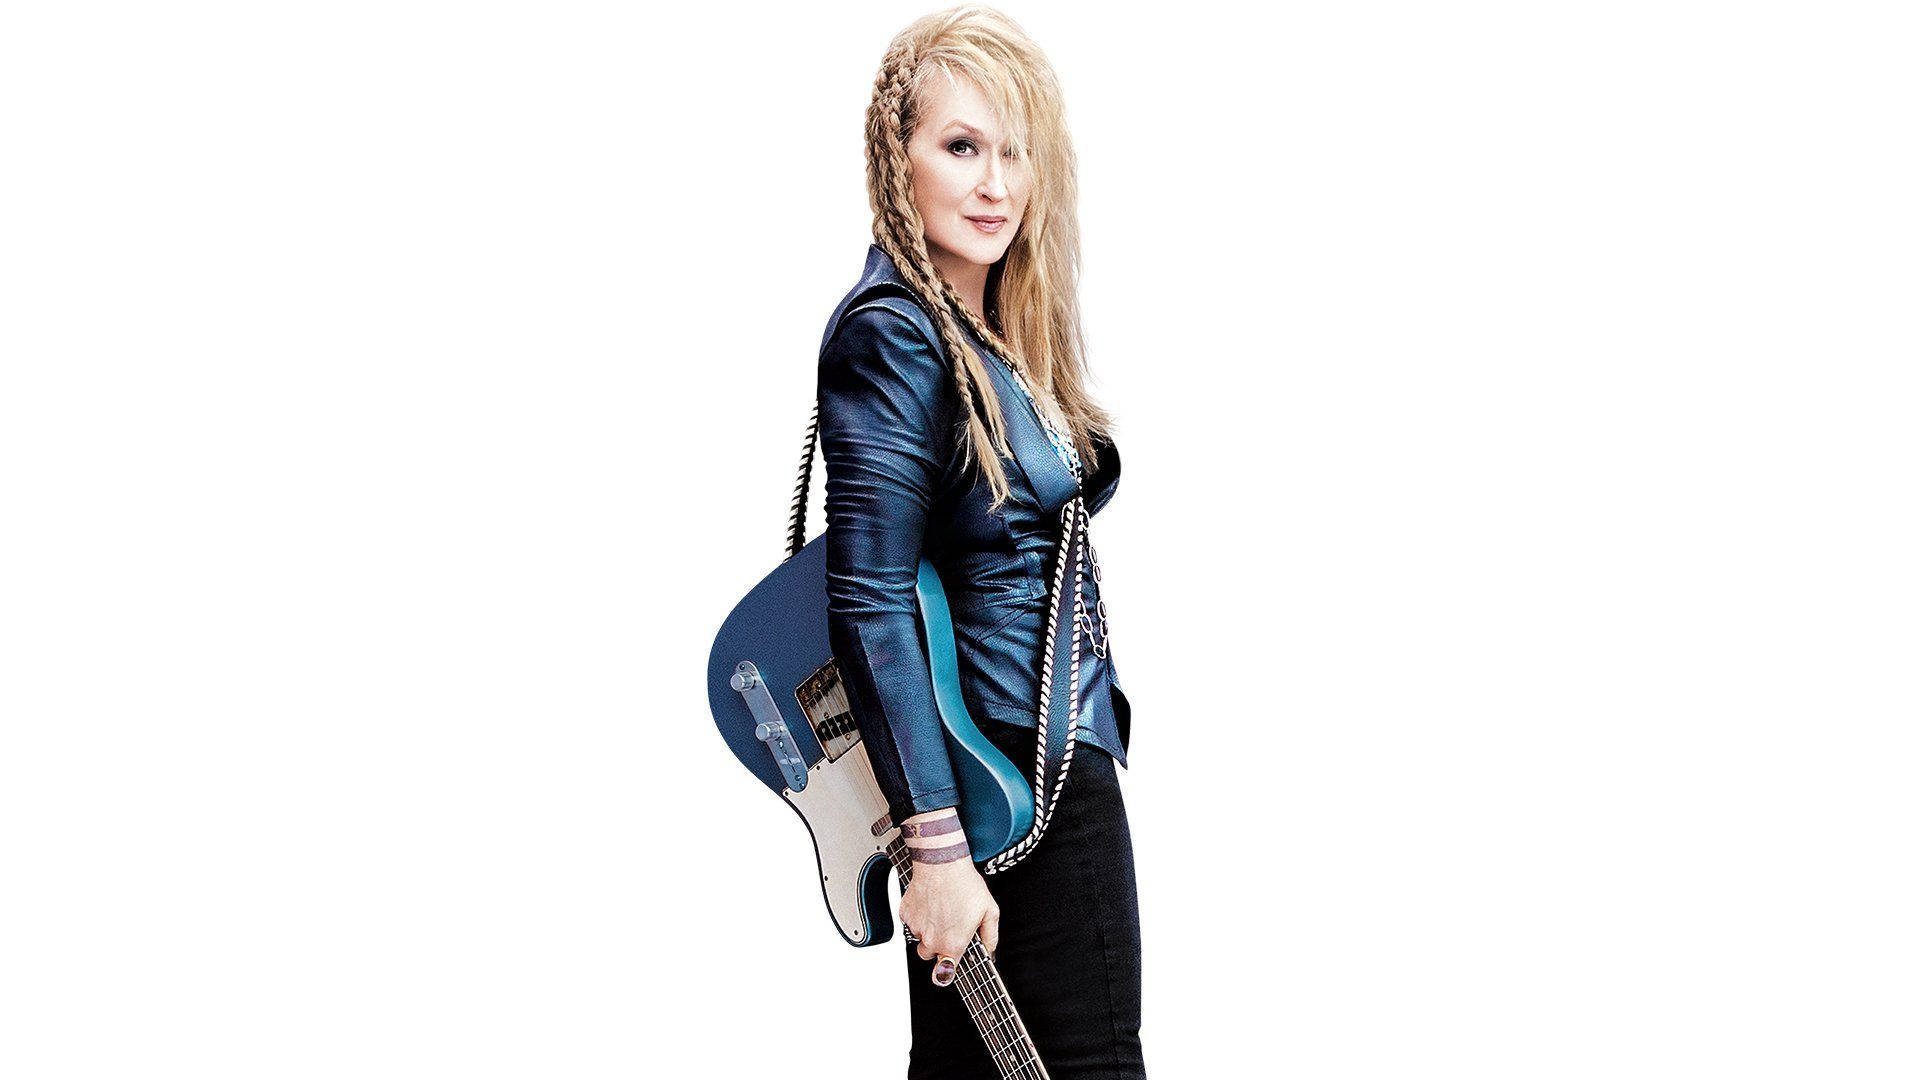 Meryl Streep In A Rockstar Outfit Background